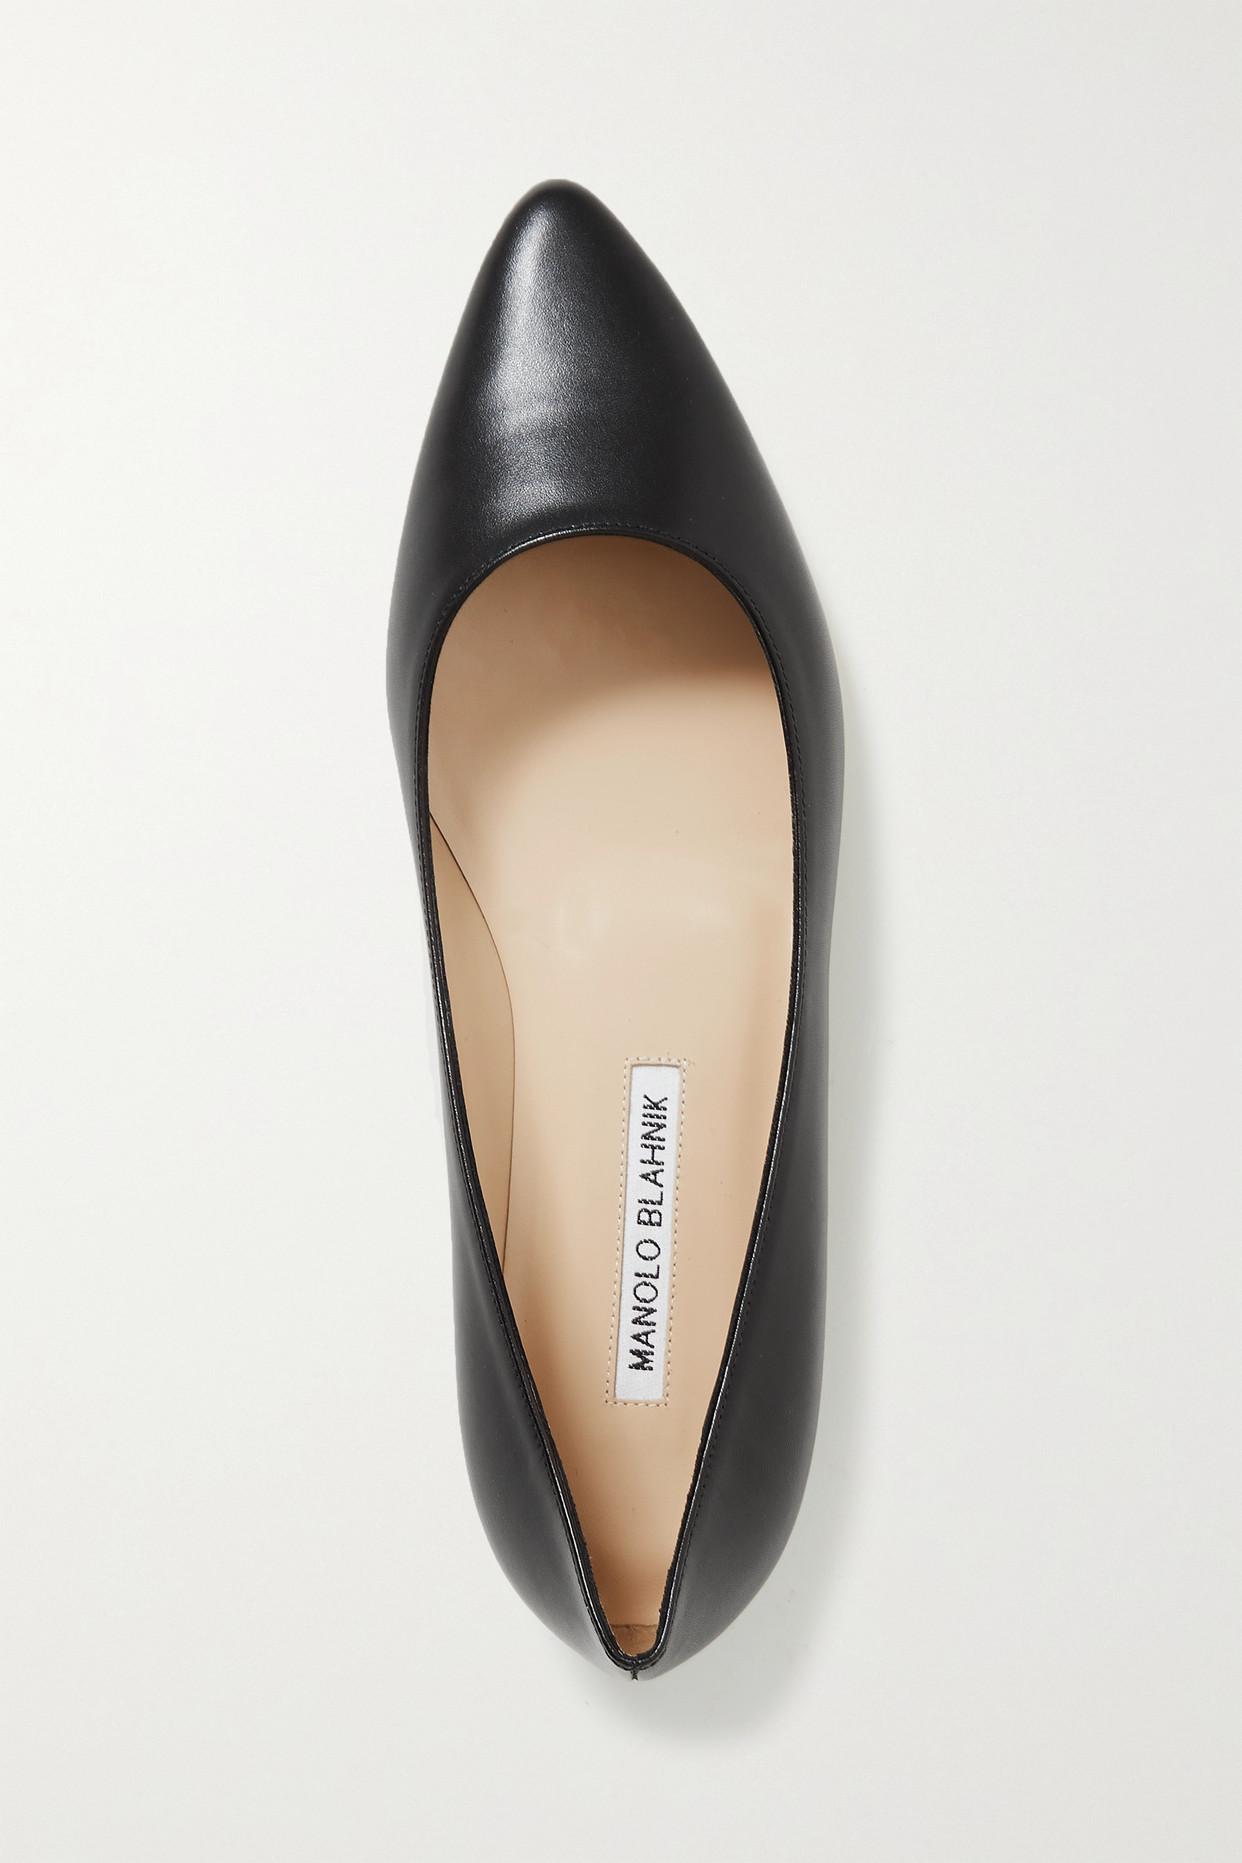 Manolo Blahnik Titto Leather Point-toe Flats in Black | Lyst